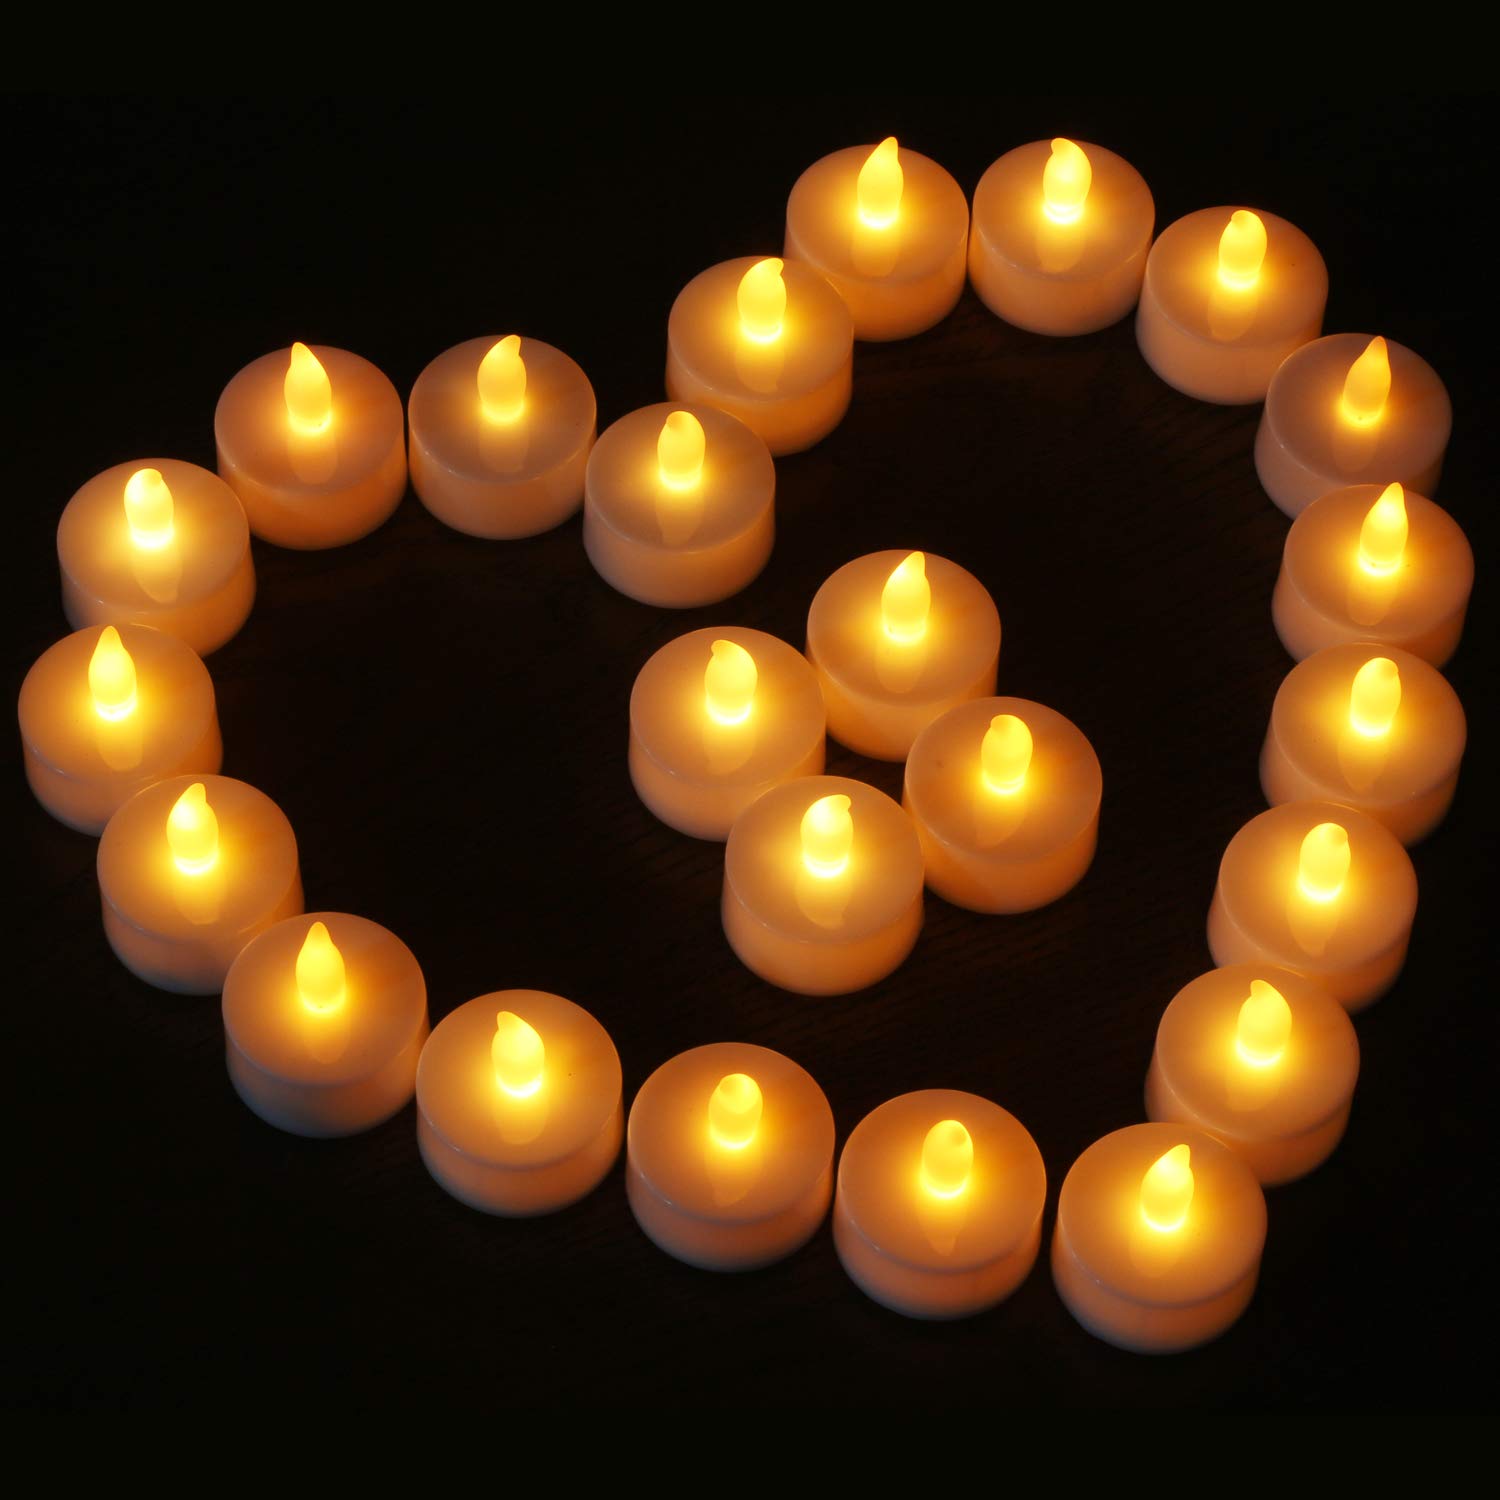 Novelty Place 24 Pcs Flameless LED Tea Light Candles Flickering Tealights Electric Battery-Powered - image 1 of 7